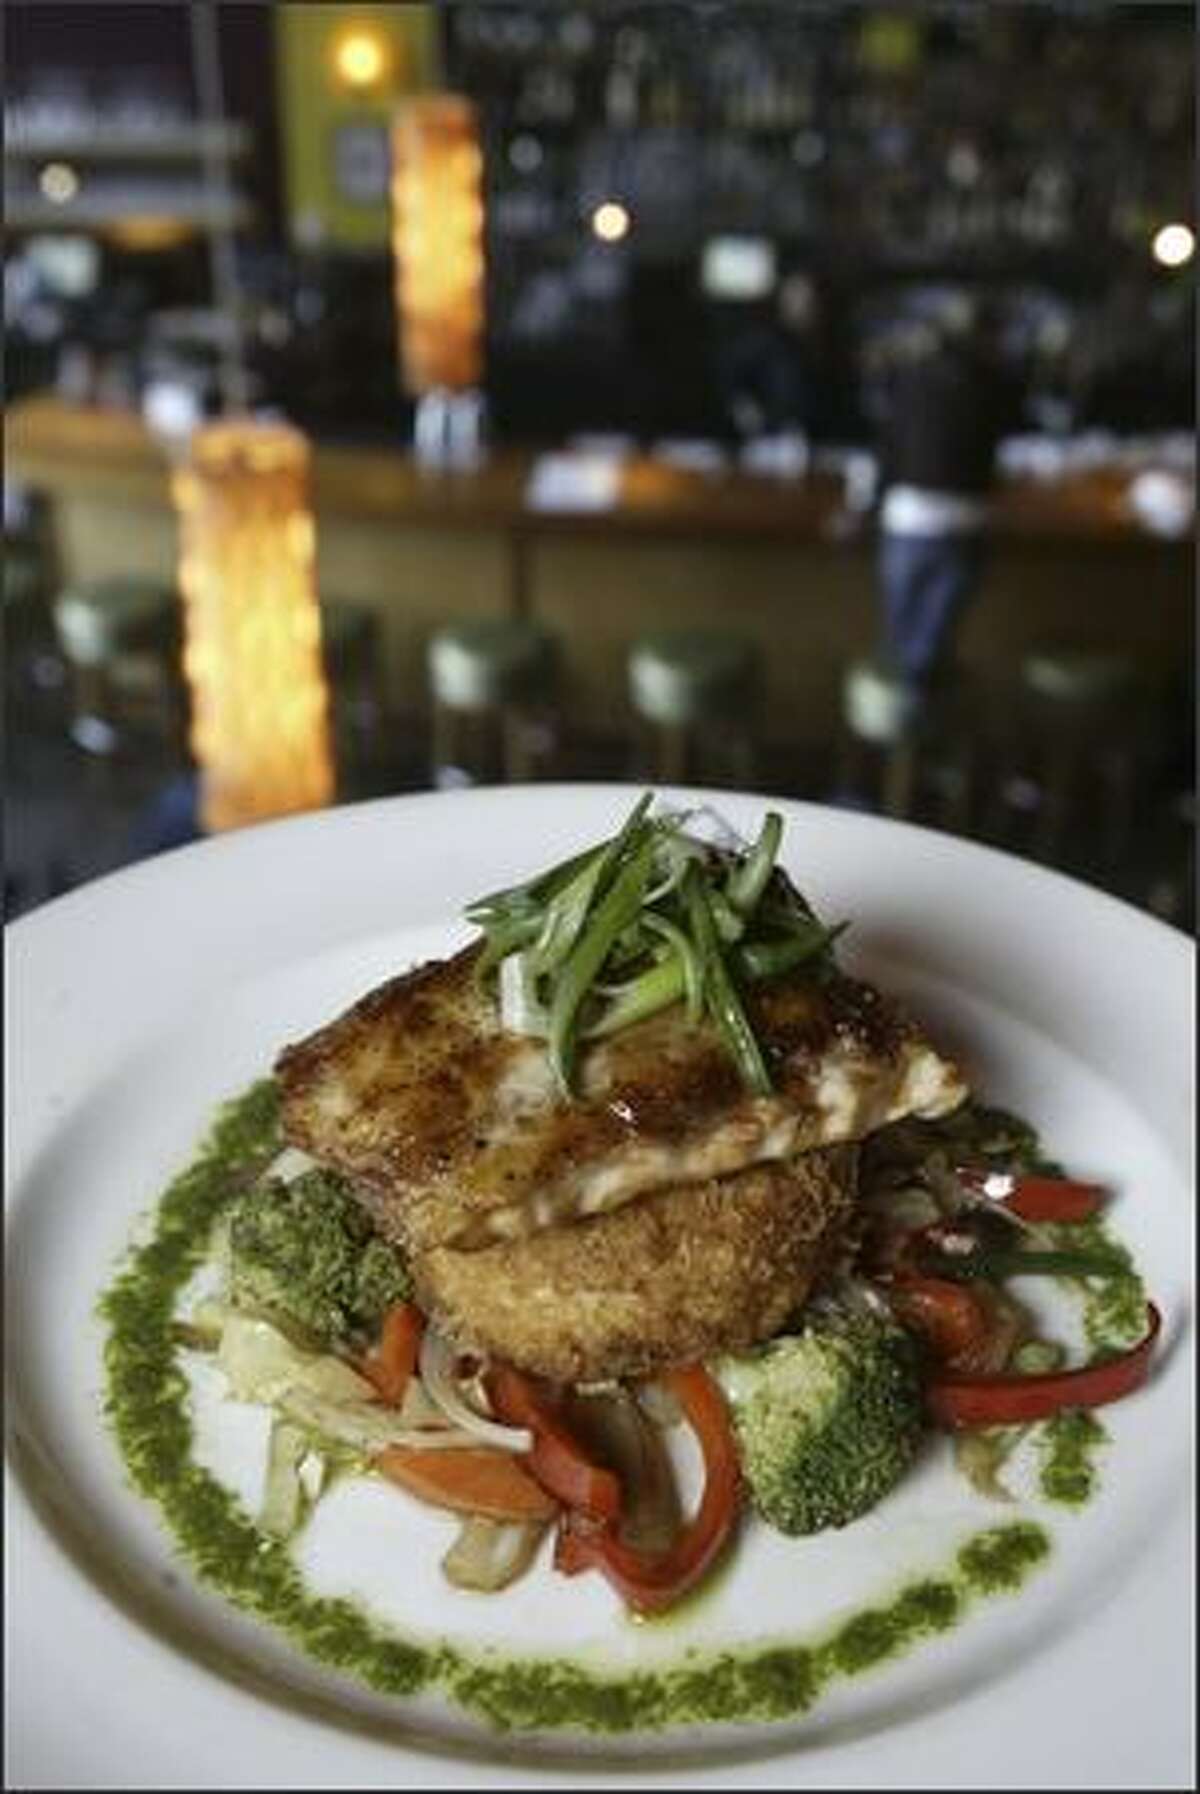 The mouth-watering view of hoisin-glazed mahi with wok vegetables and risotto cake as seen from the loft dining area at Flying Fish.